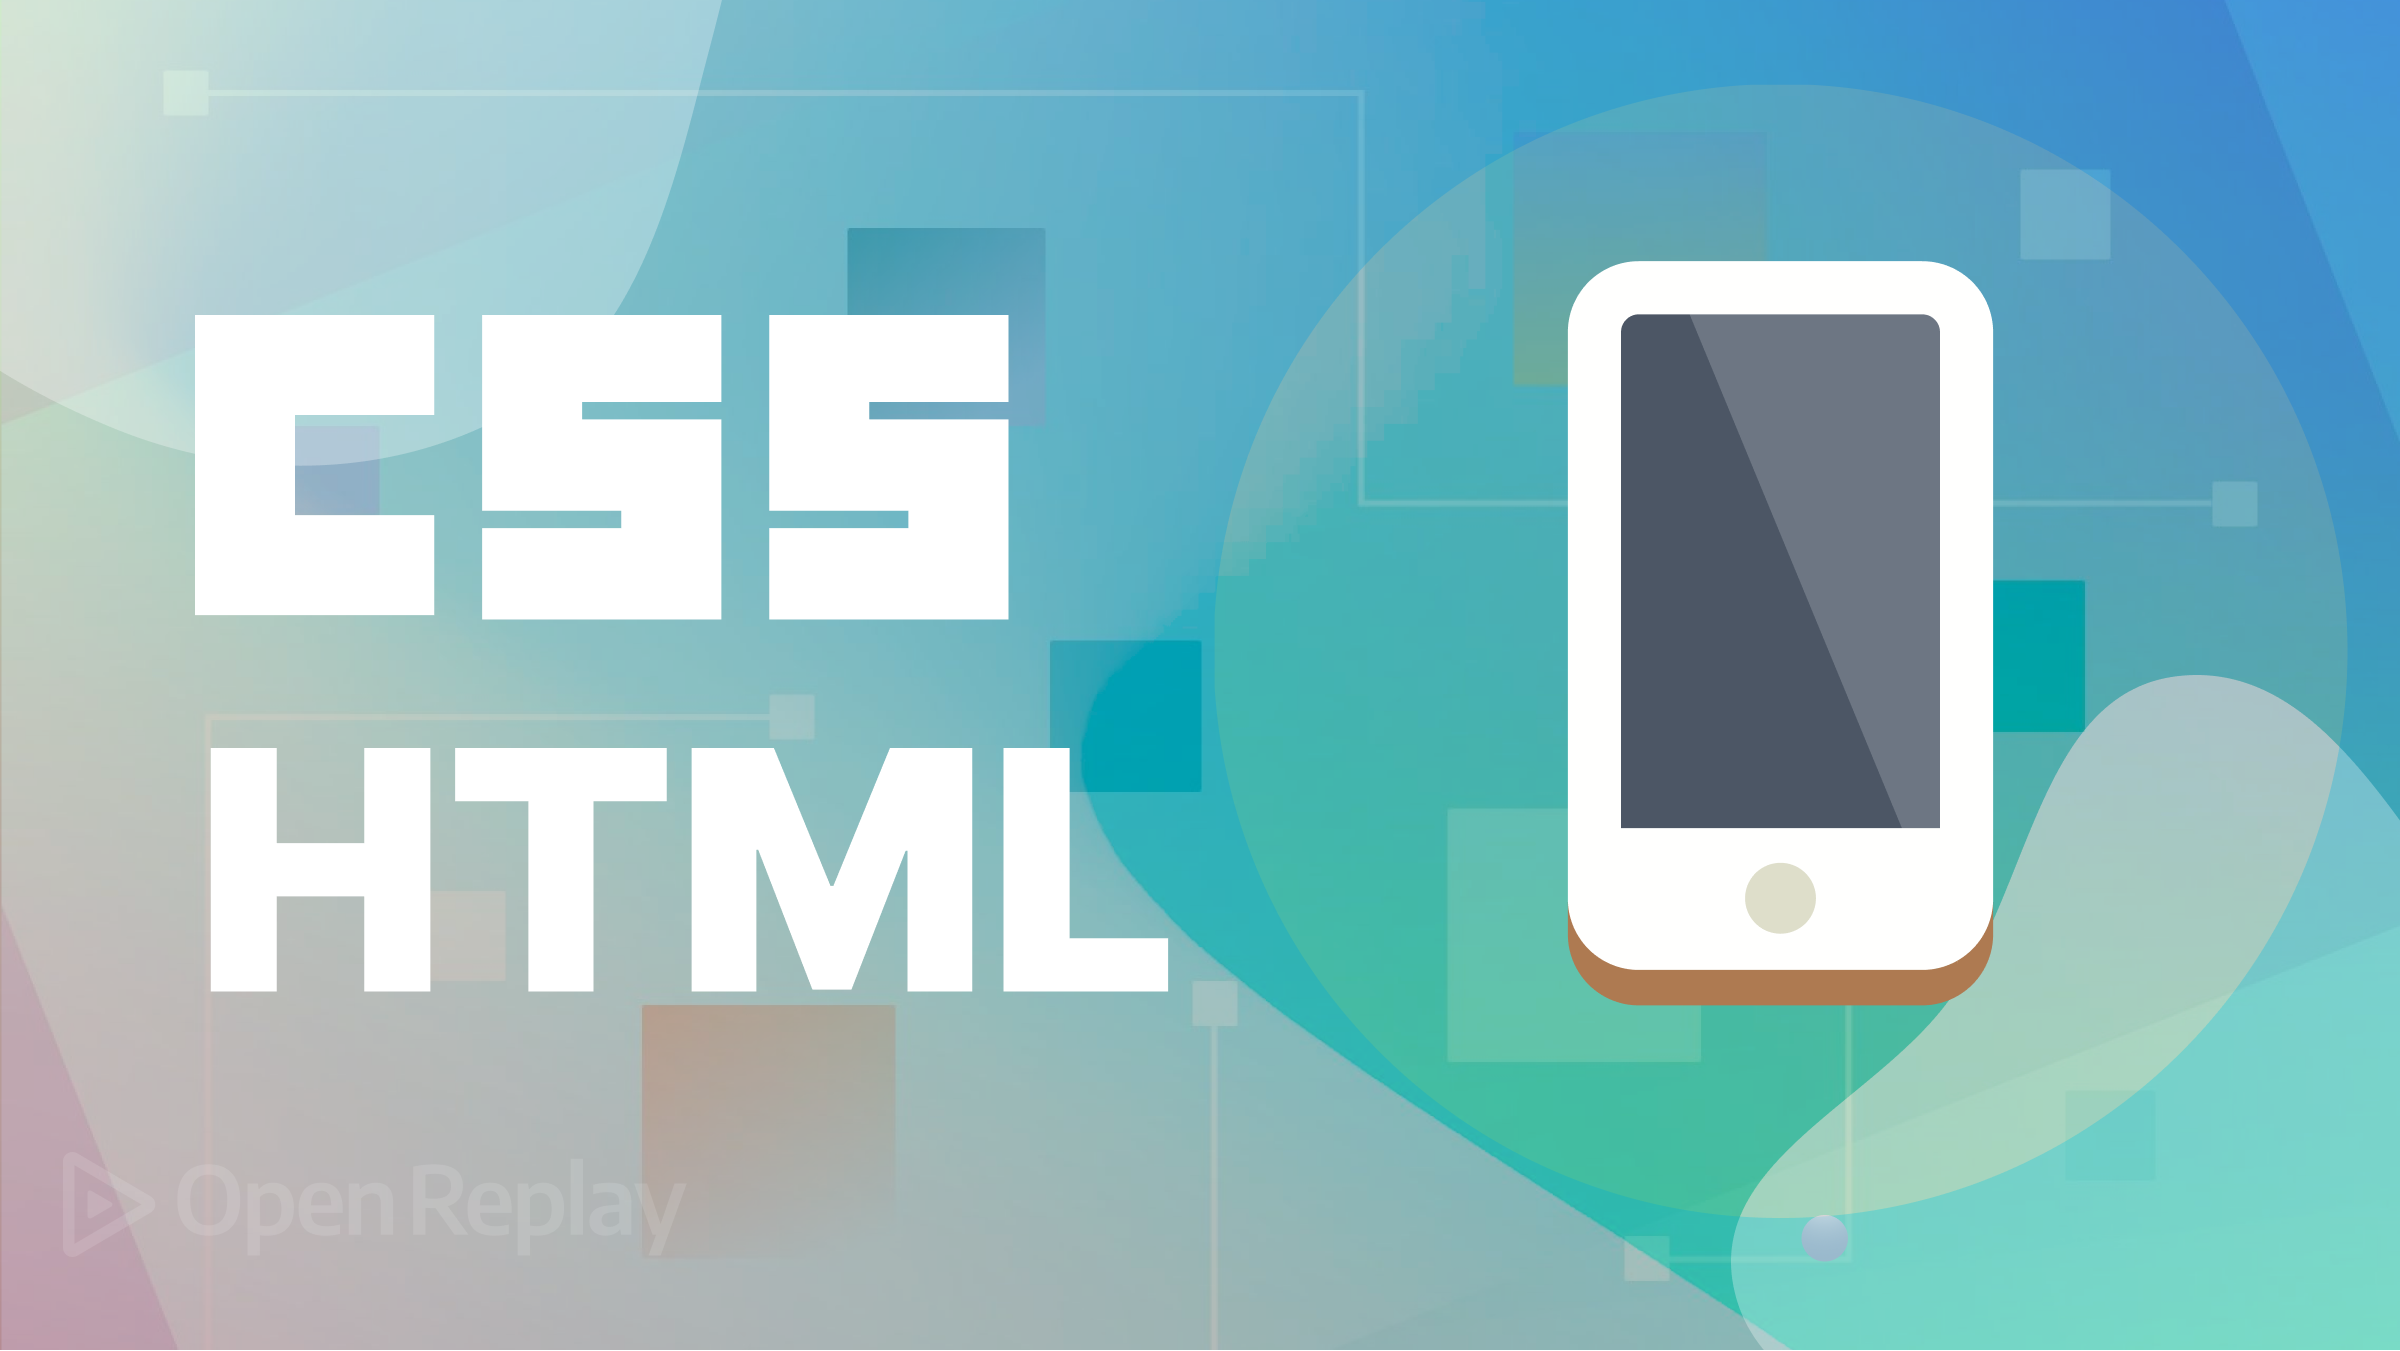 Mobile-first approach with HTML and CSS